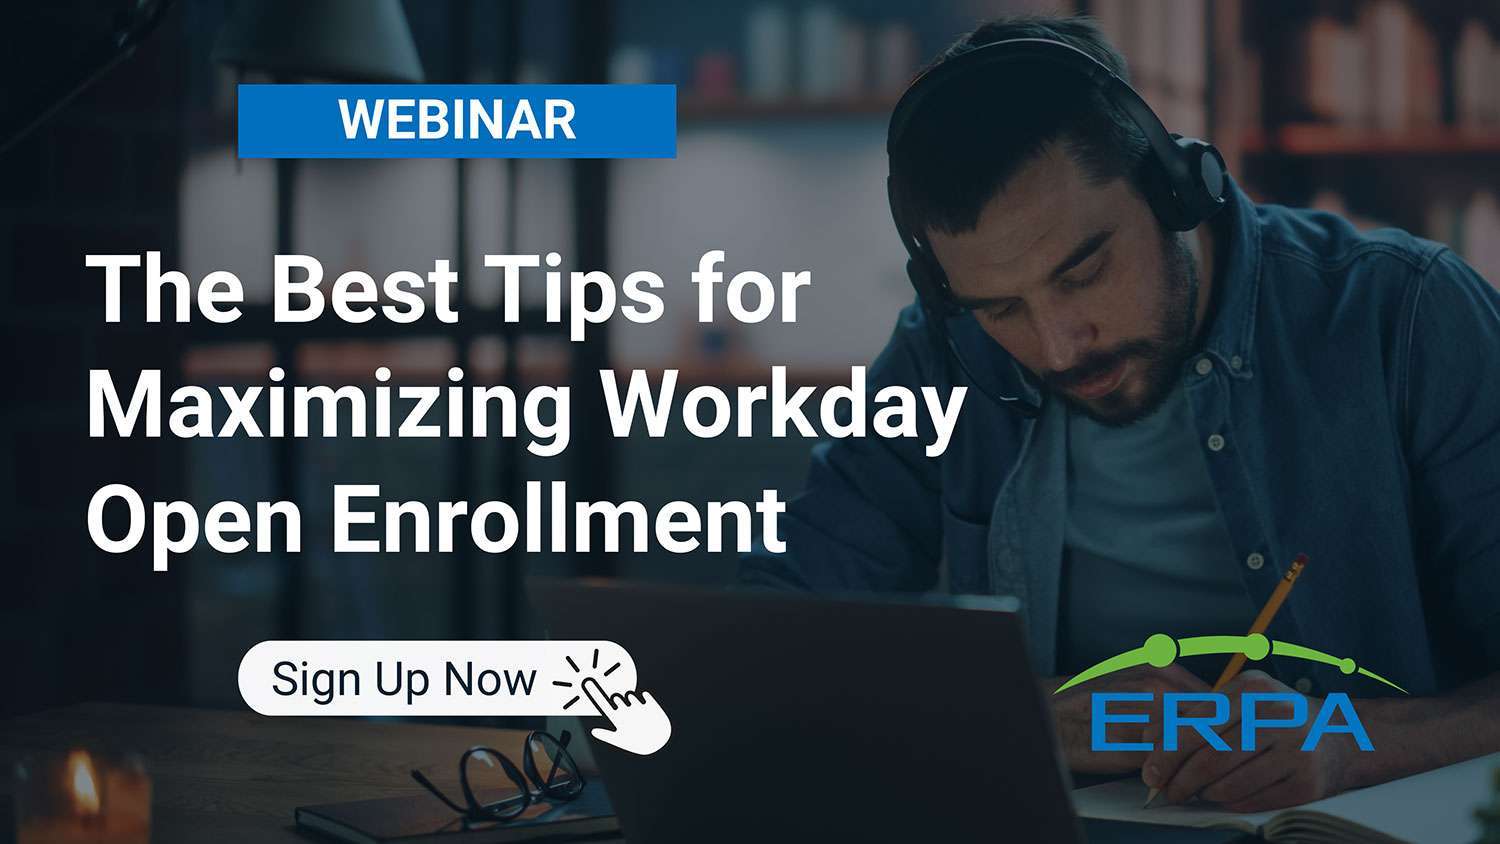 ERPA Webinar: The Best Tips for Maximizing Workday Open Enrollment